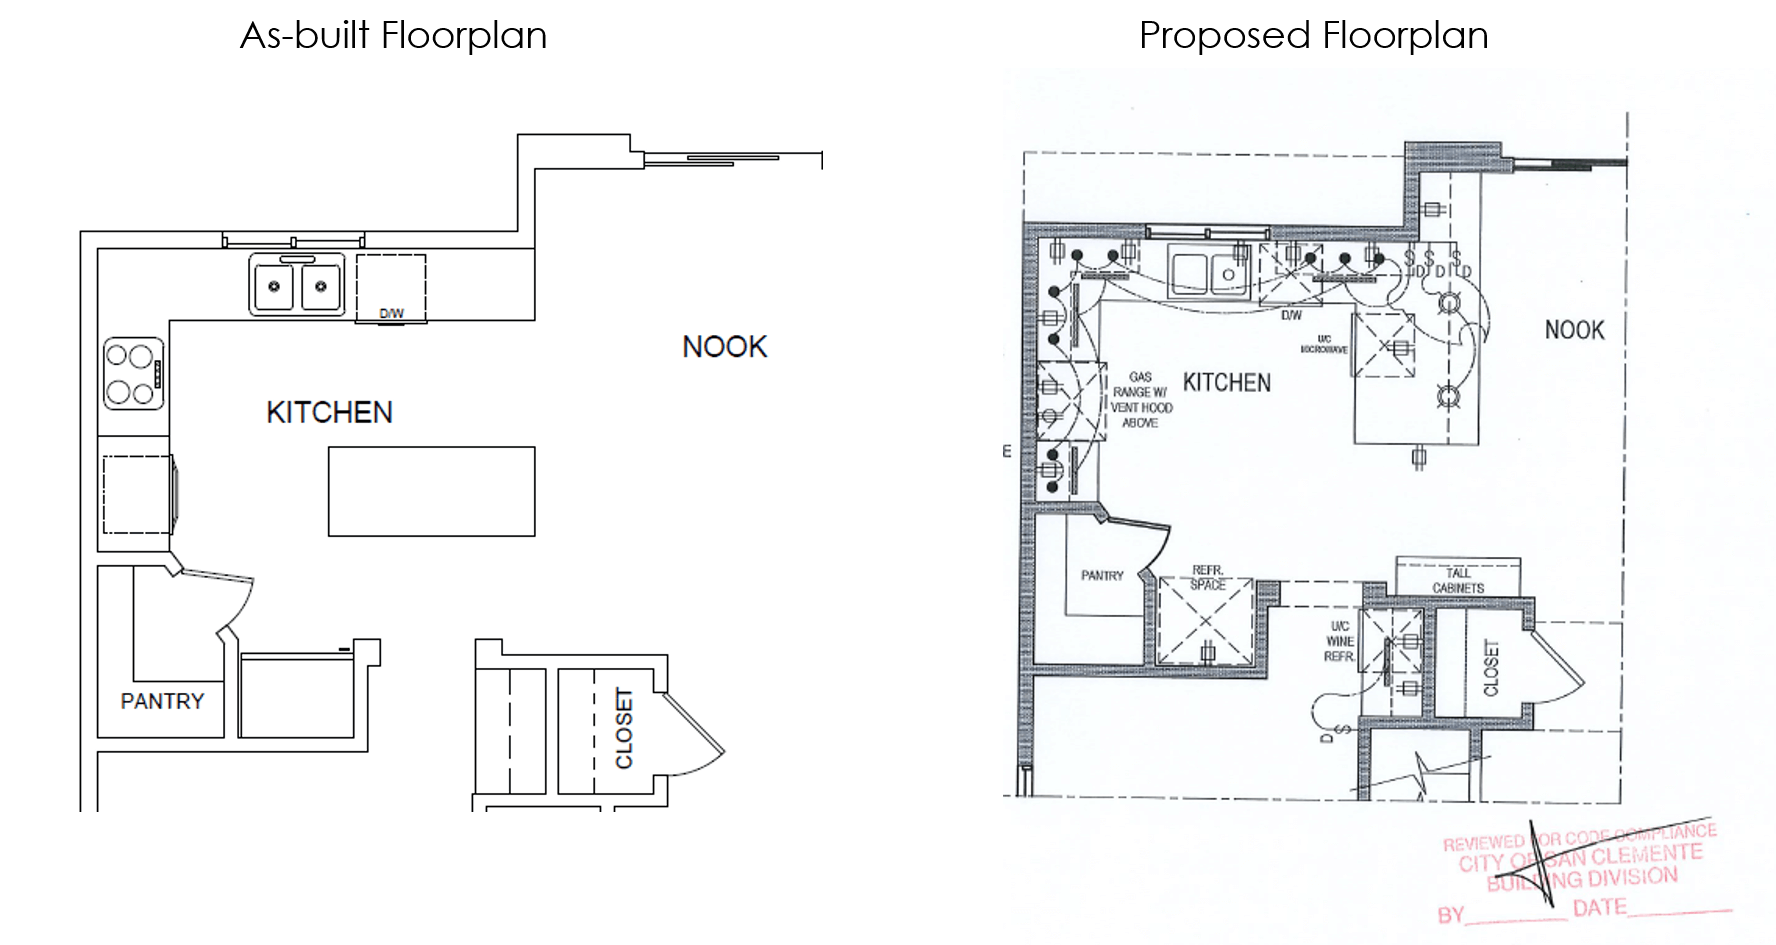 As-built plans with proposed plans